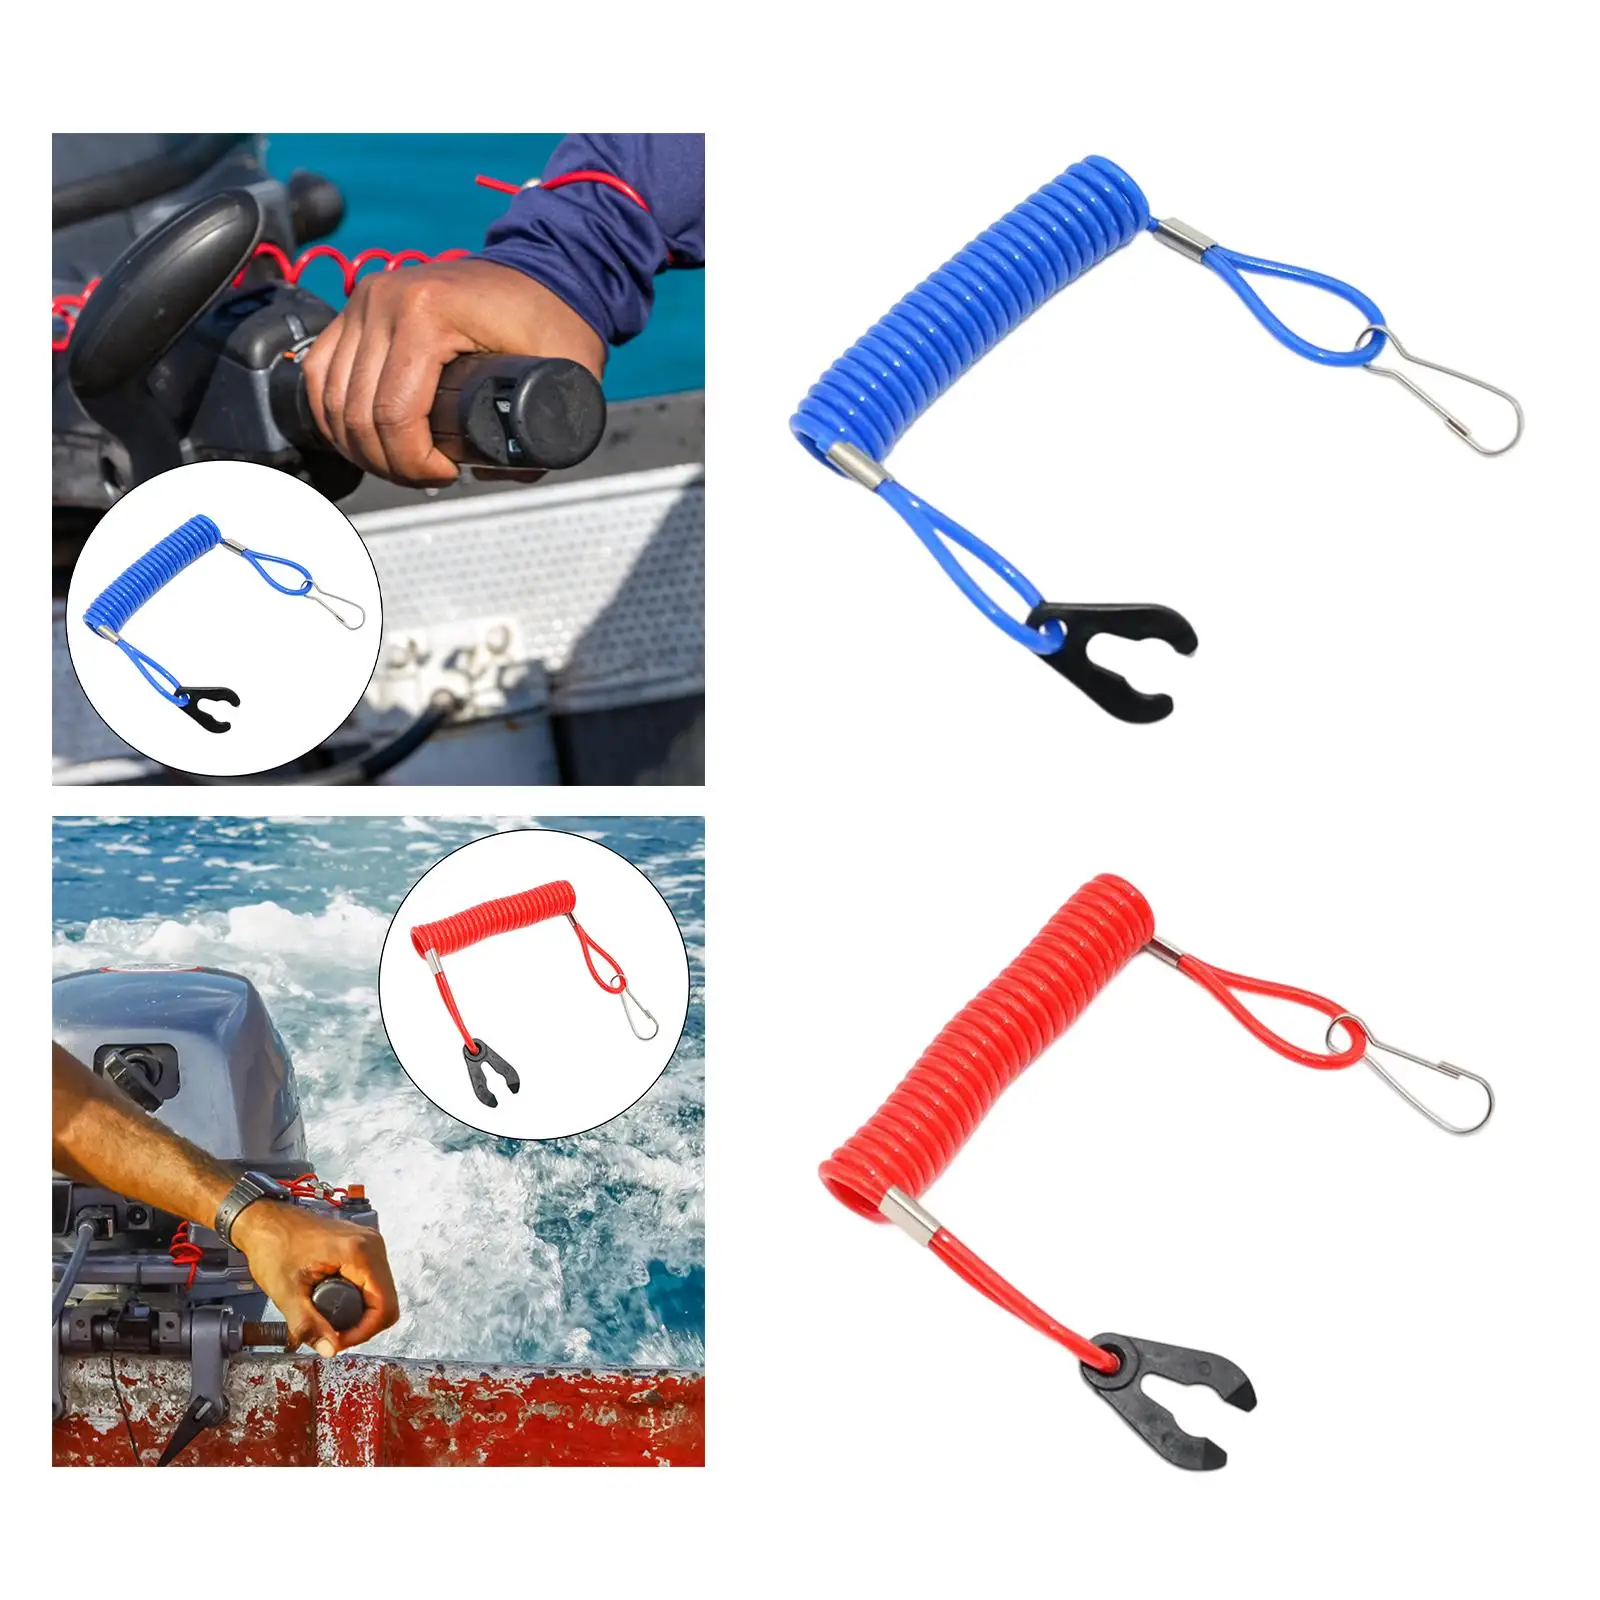 Kill Switch Safety Lanyard 1.6M Easy to Install Accessories Easy to Use Outboard Emergency Stop Lanyard for Outboard Motors